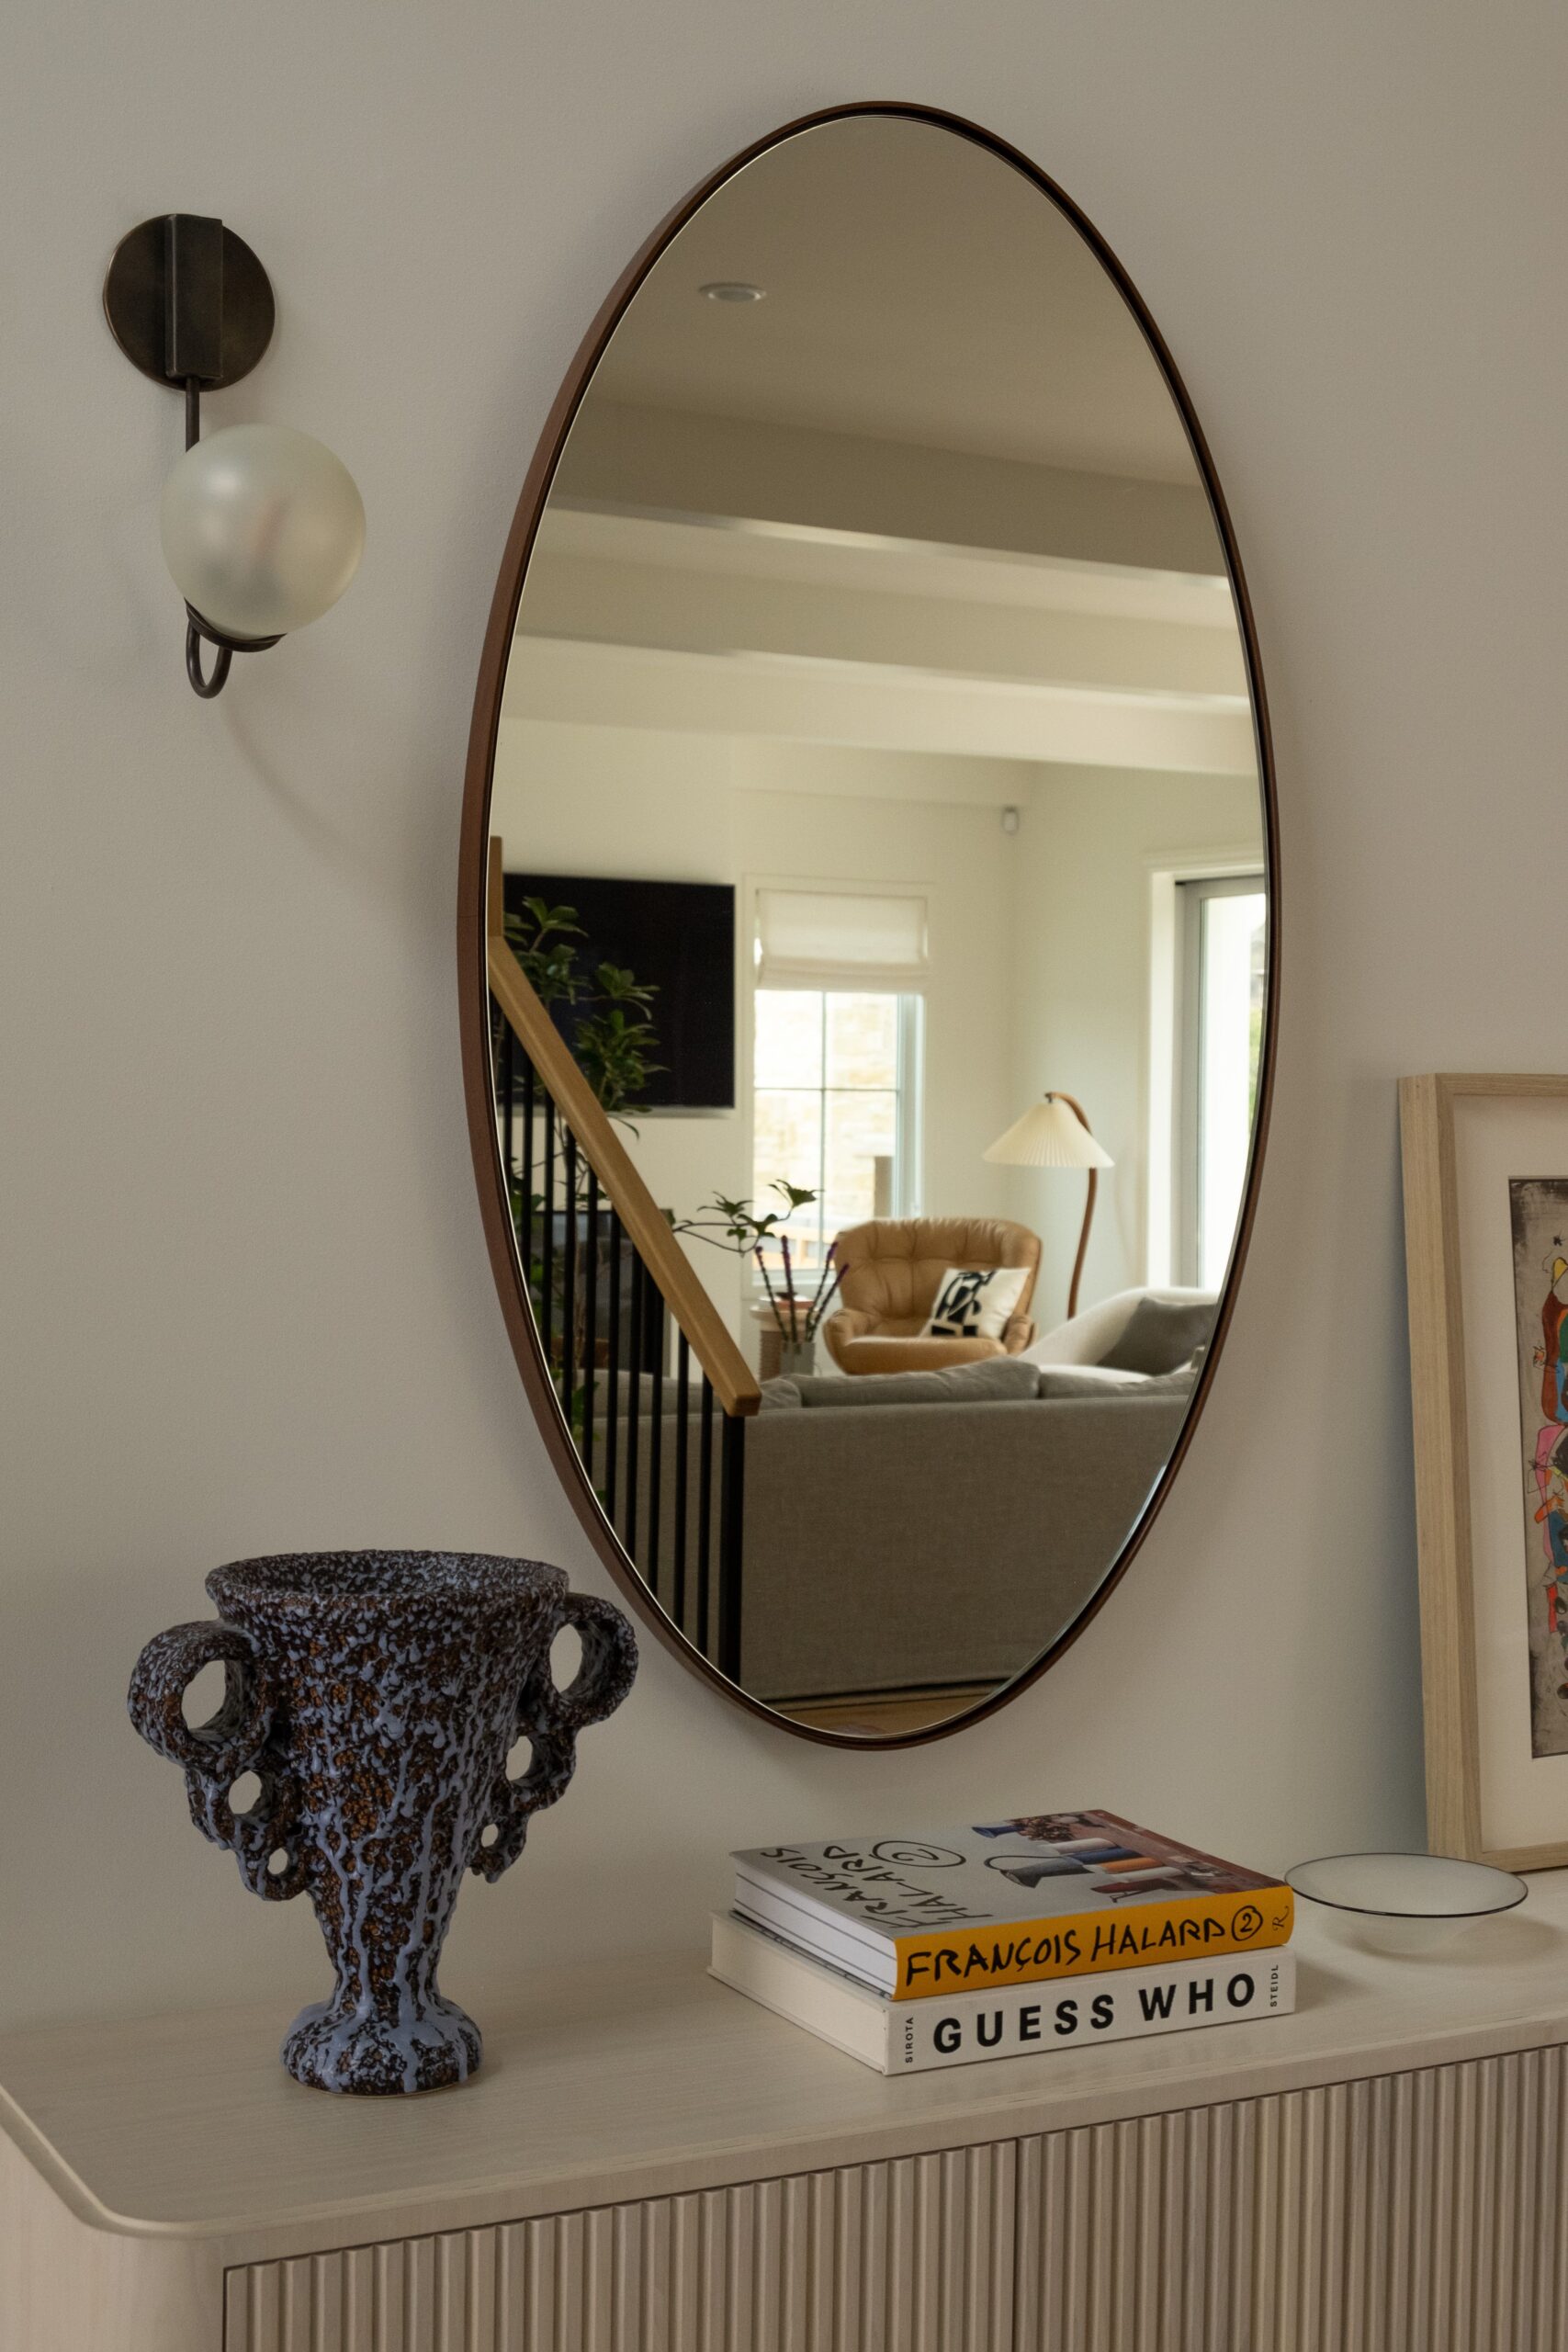 Oval Mirror Designs: Add Elegance and Sophistication to Your Space with Oval Mirrors